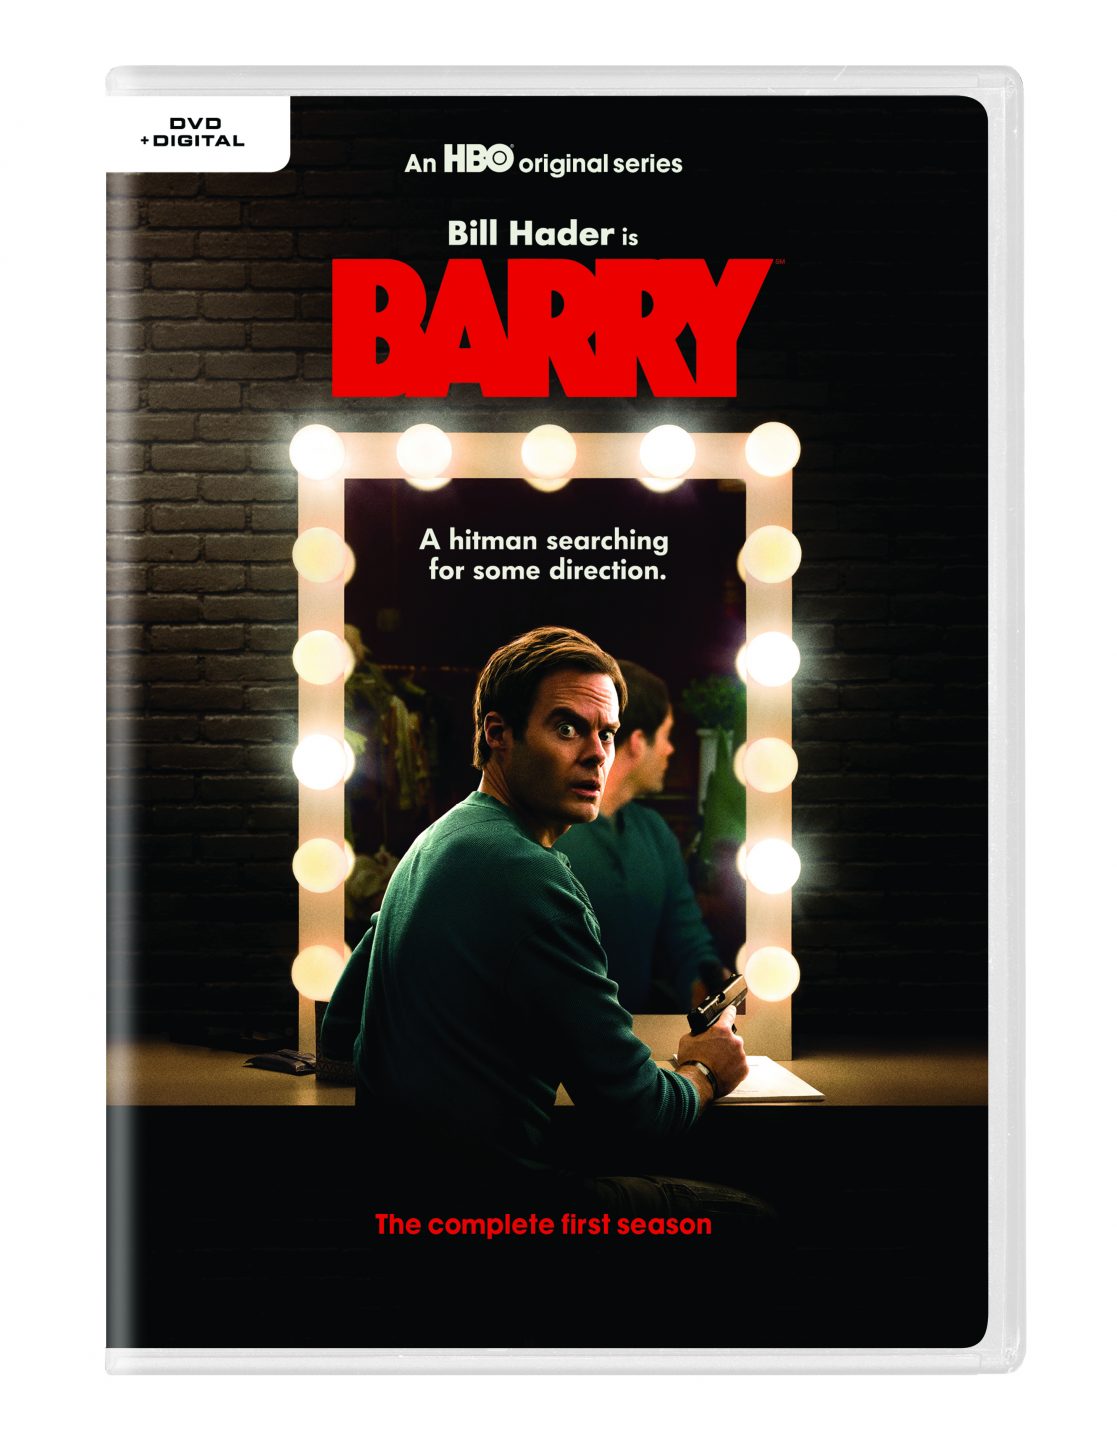 Barry; The Complete First Season DVD cover 9HBO)